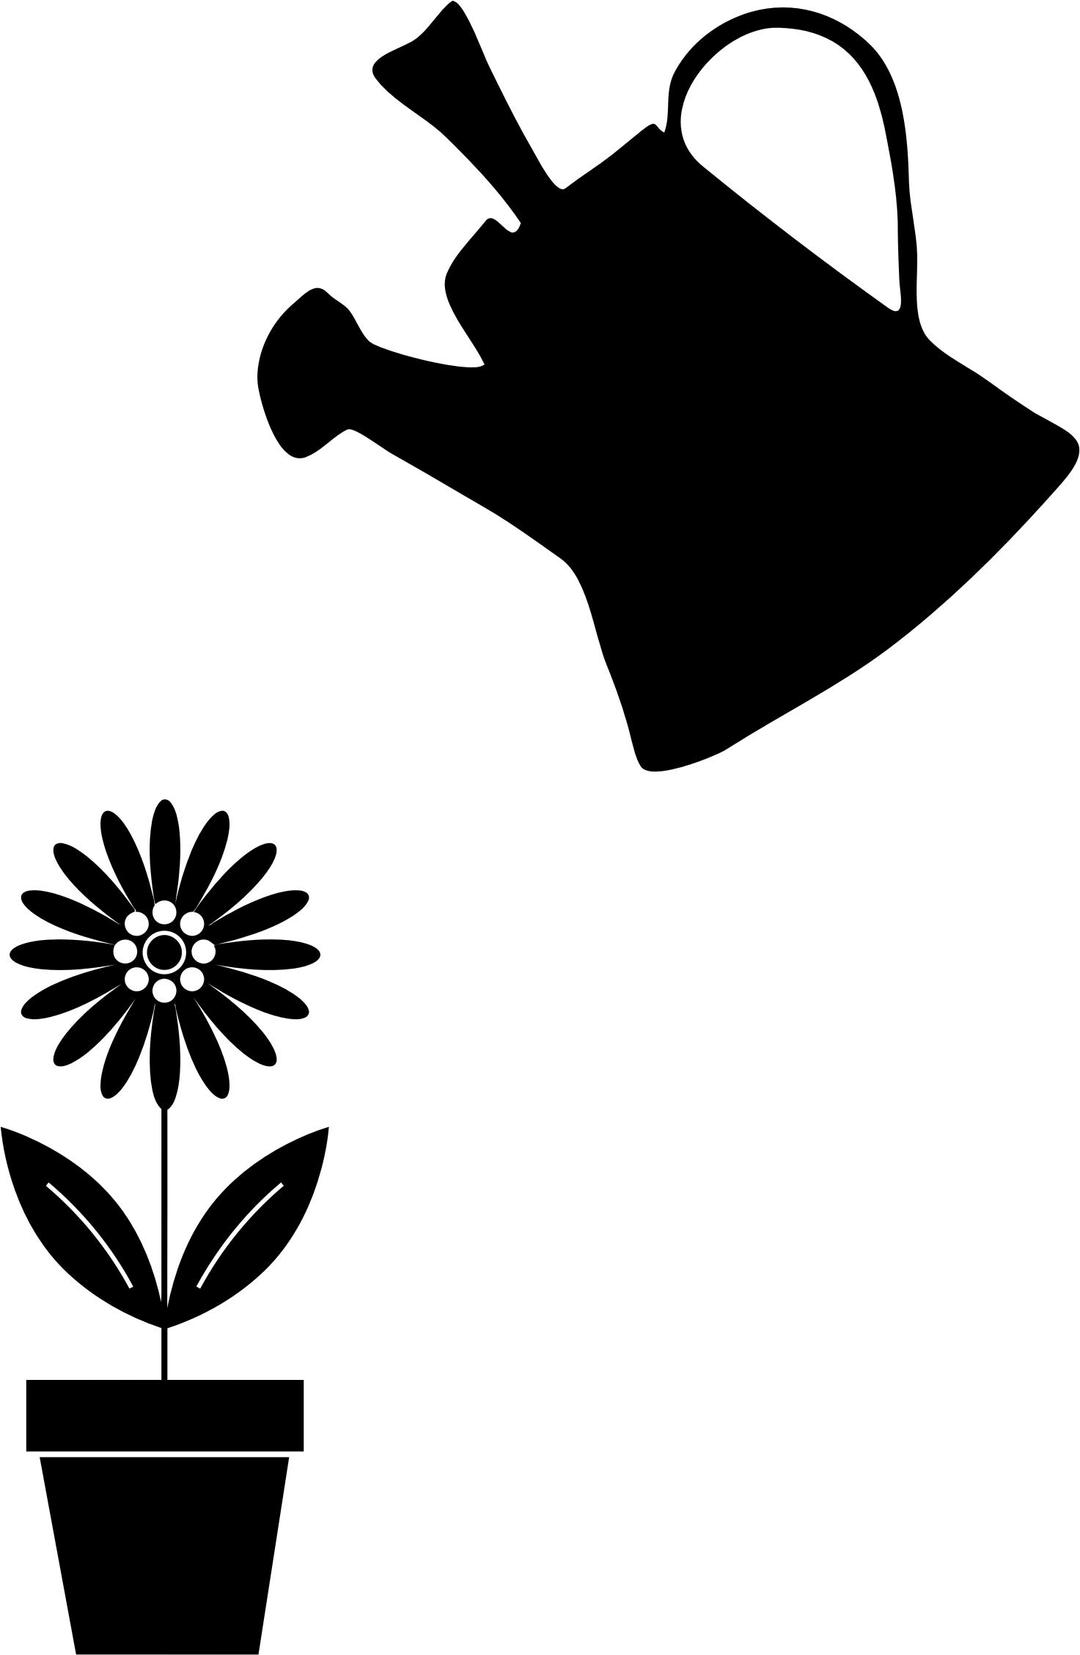 Potted Flower And Watering Can png transparent